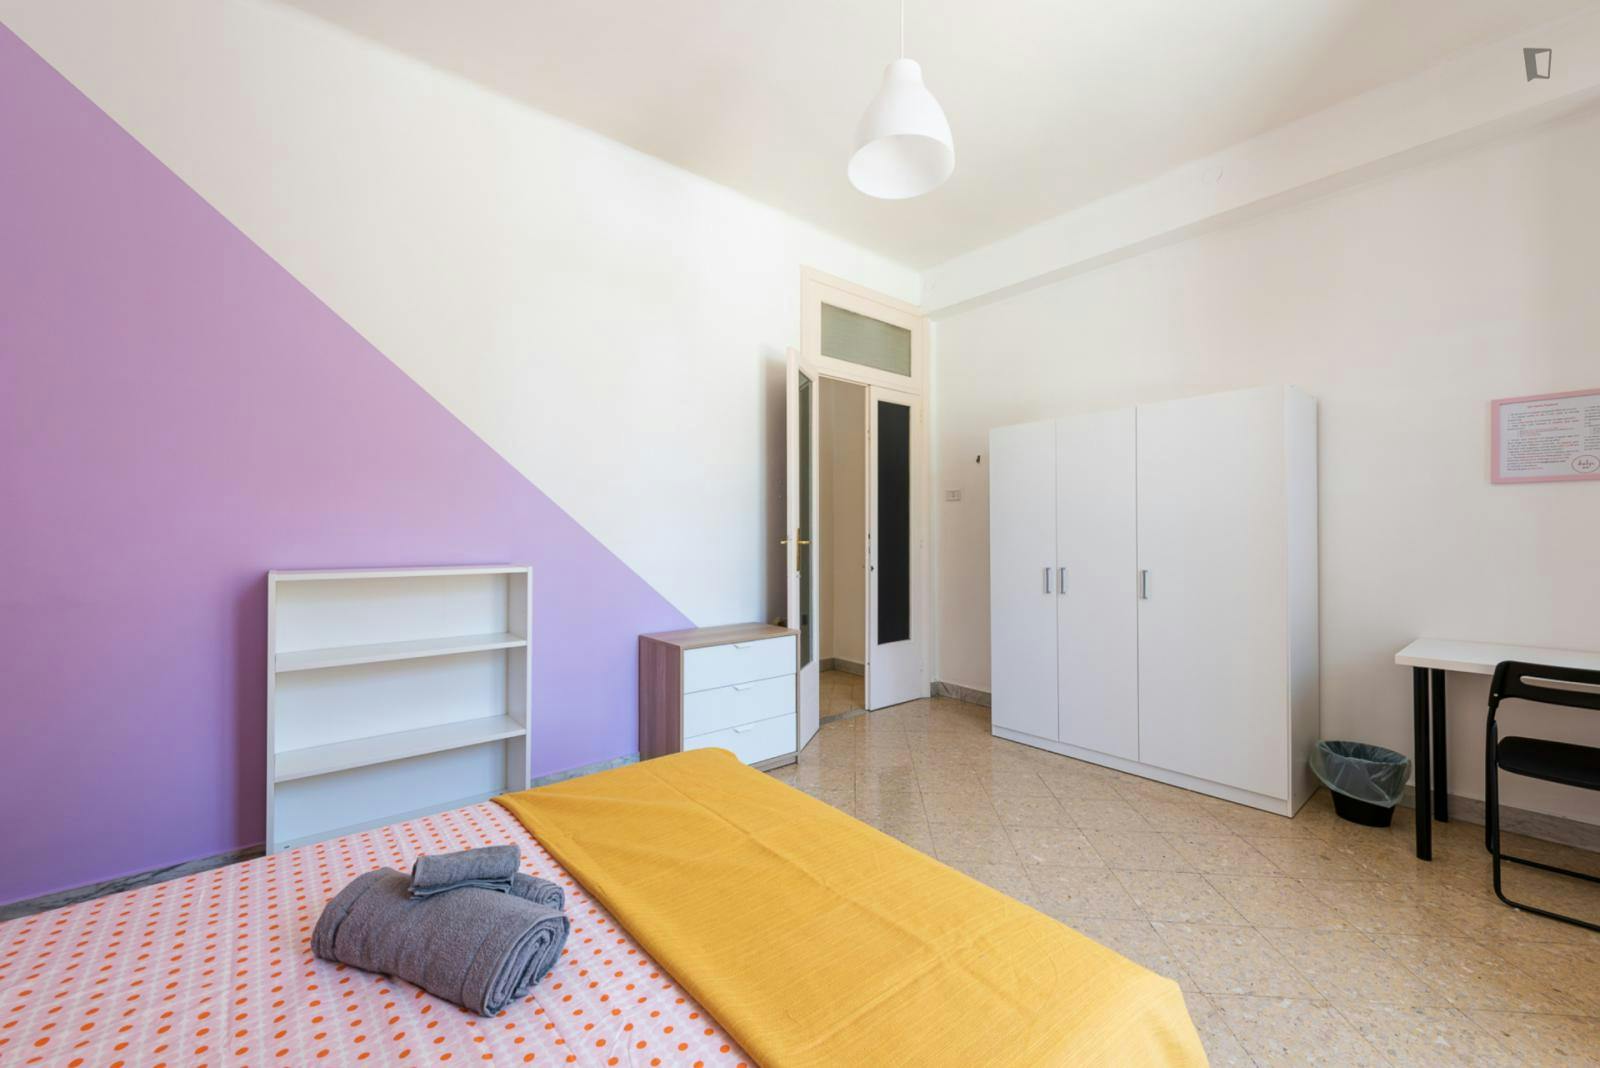 Homely double bedroom in a 4-bedroom apartment near Bari Sud Est train station